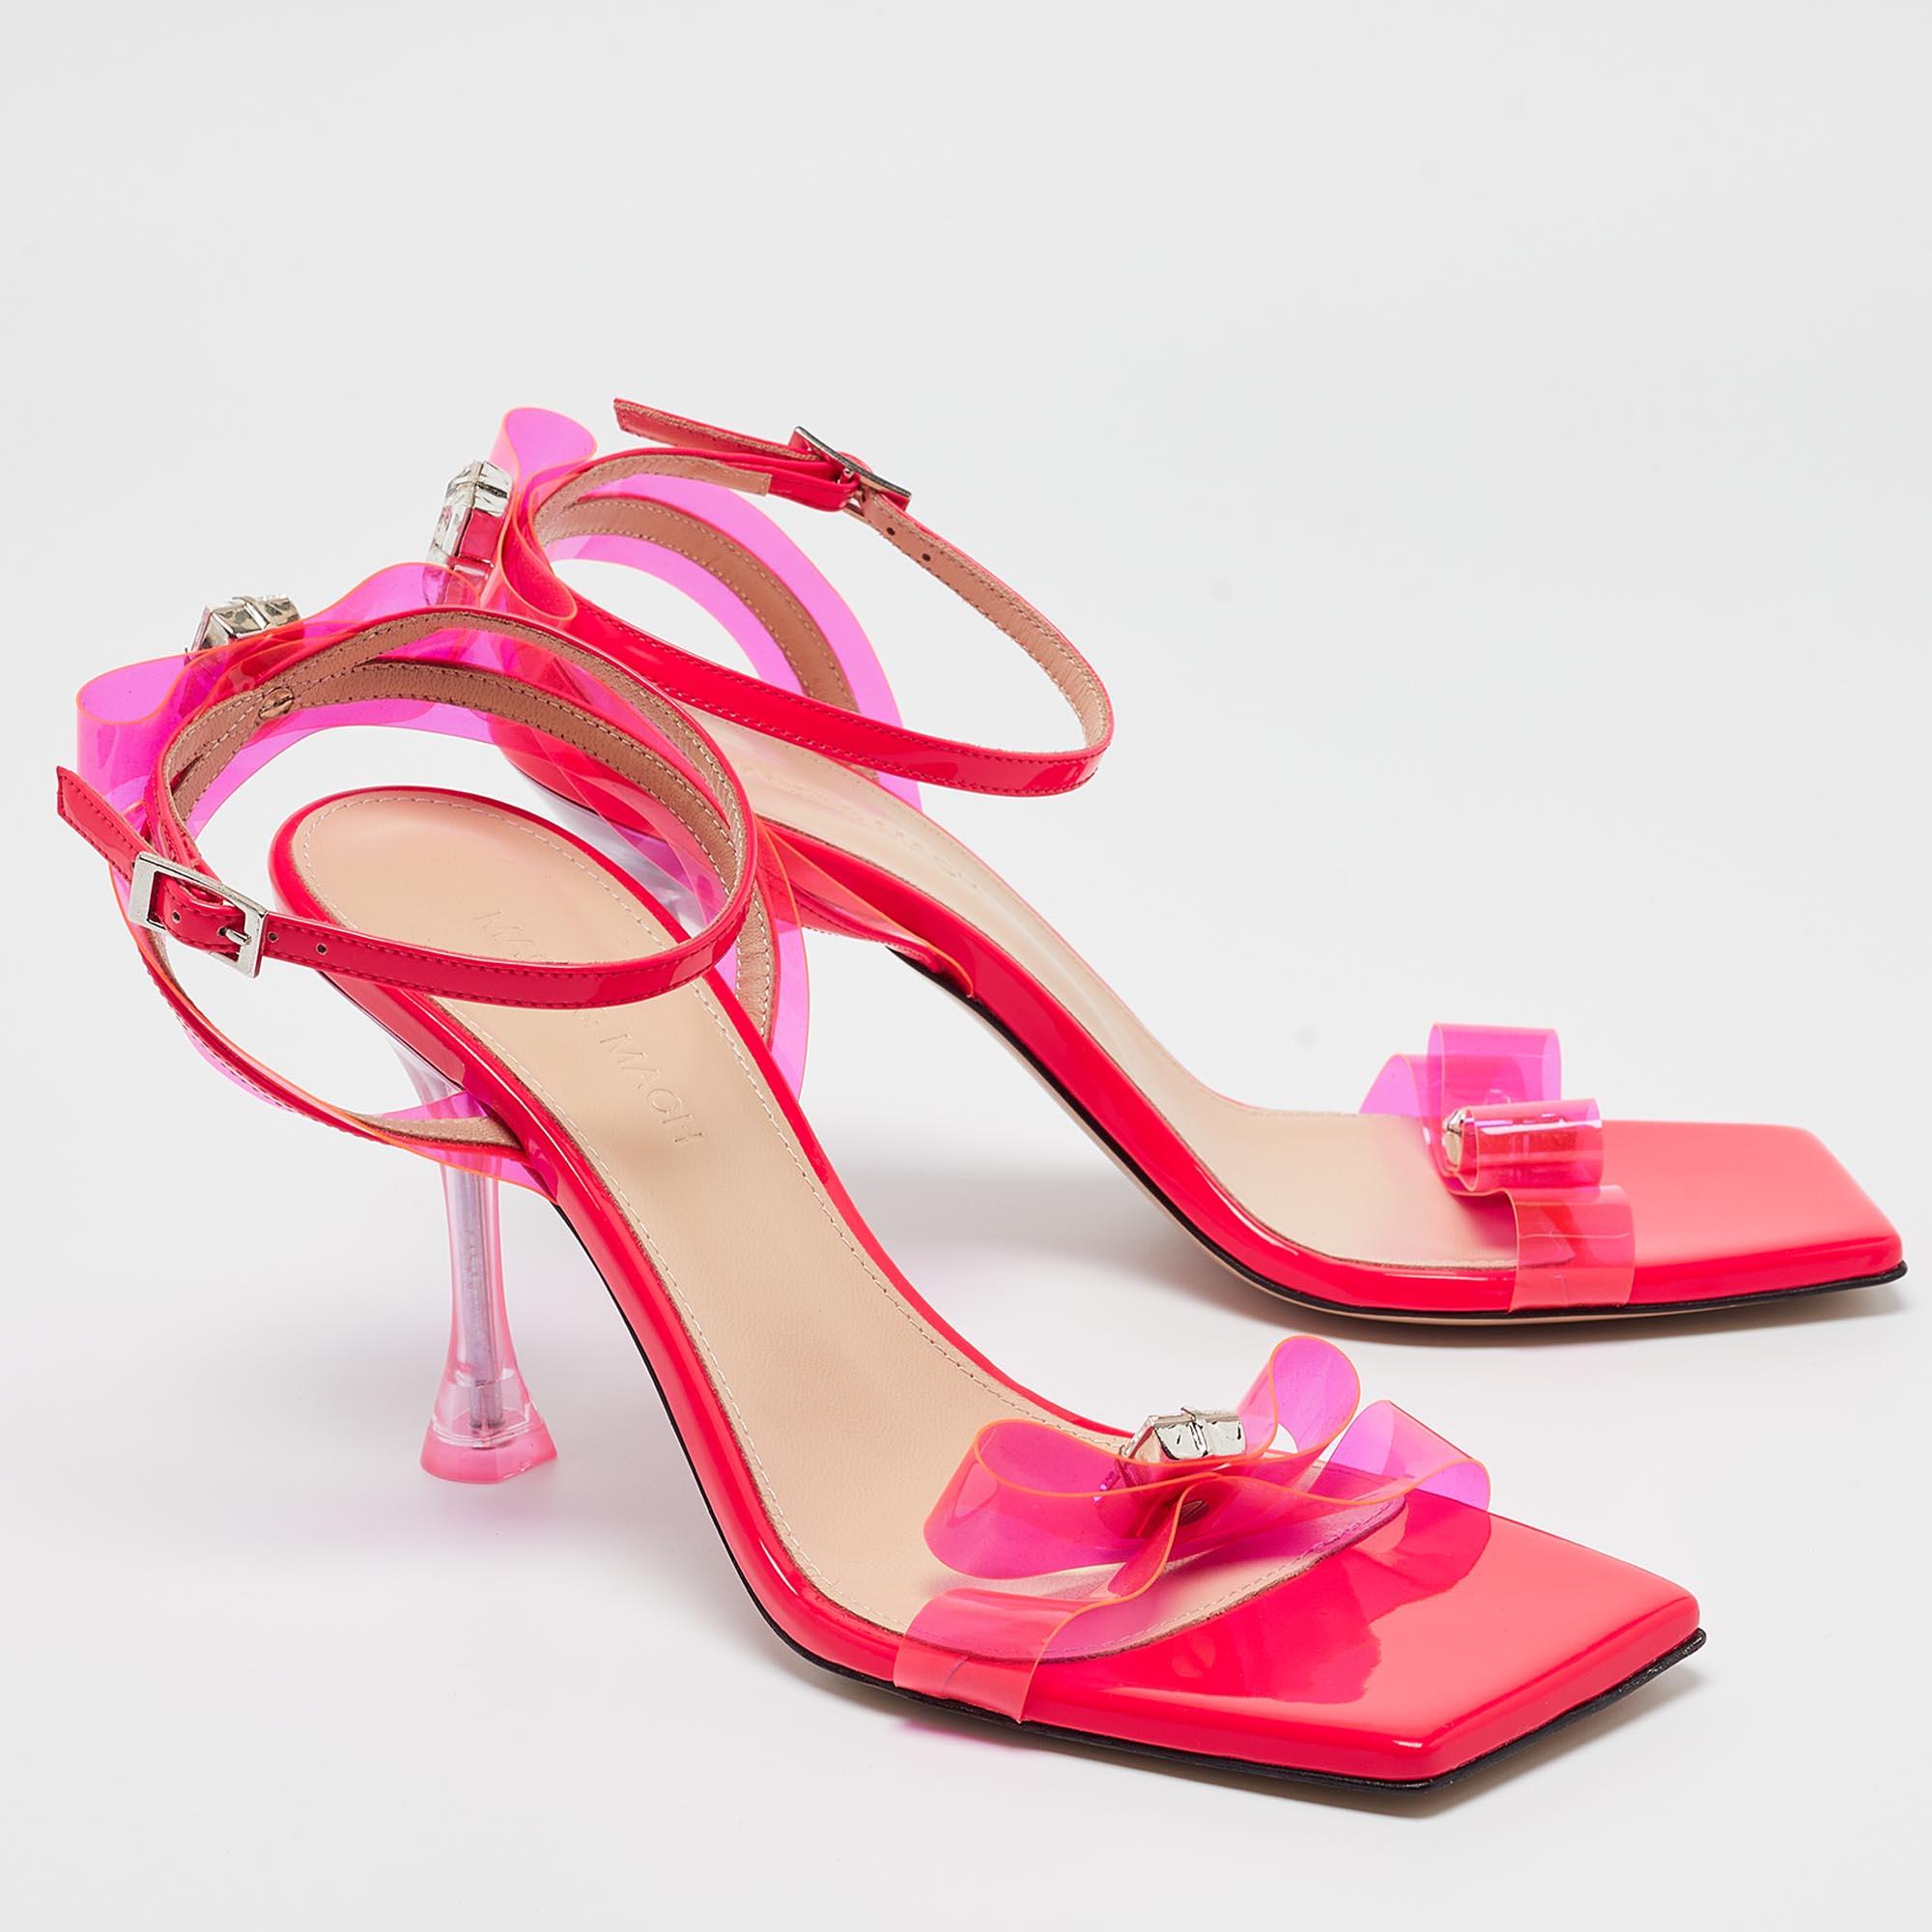 Mach & Mach Pink PVC and Patent French Bow Sandals Size 38.5 In Excellent Condition For Sale In Dubai, Al Qouz 2